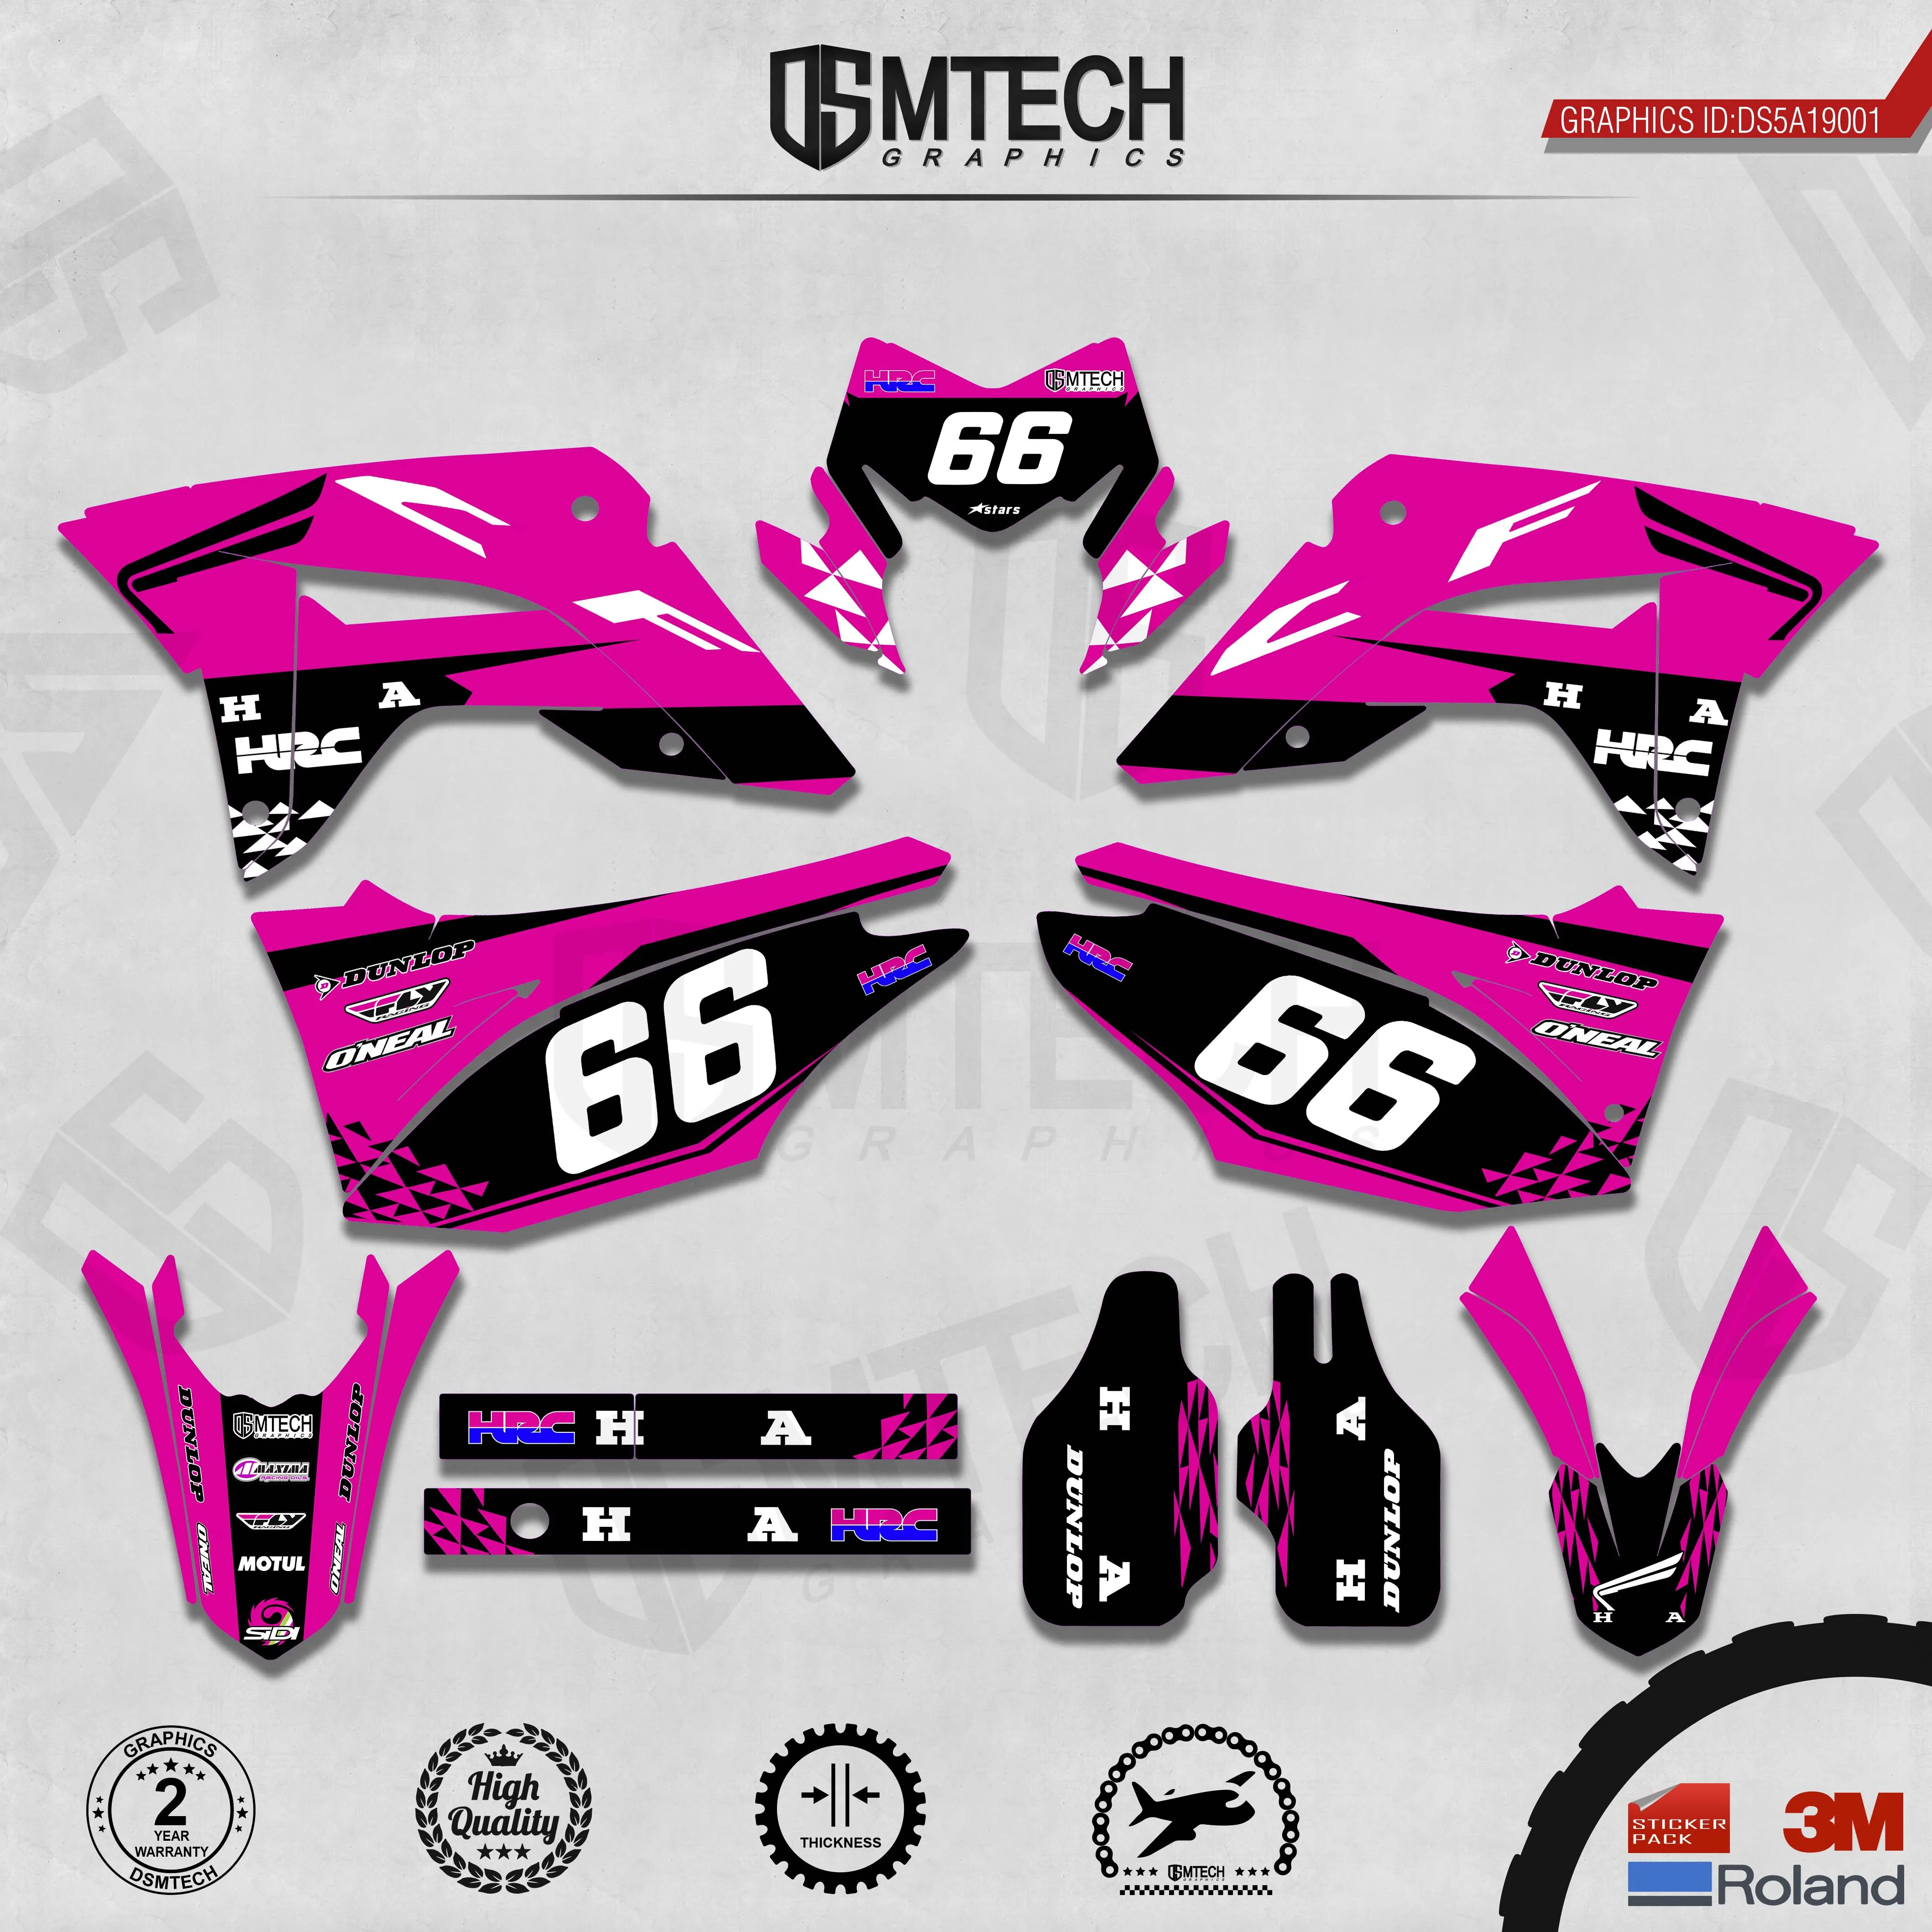 DSMTECH Customized Team Graphics Backgrounds Decals 3M Custom Stickers For  2019 2020 2021 CRF150L 001